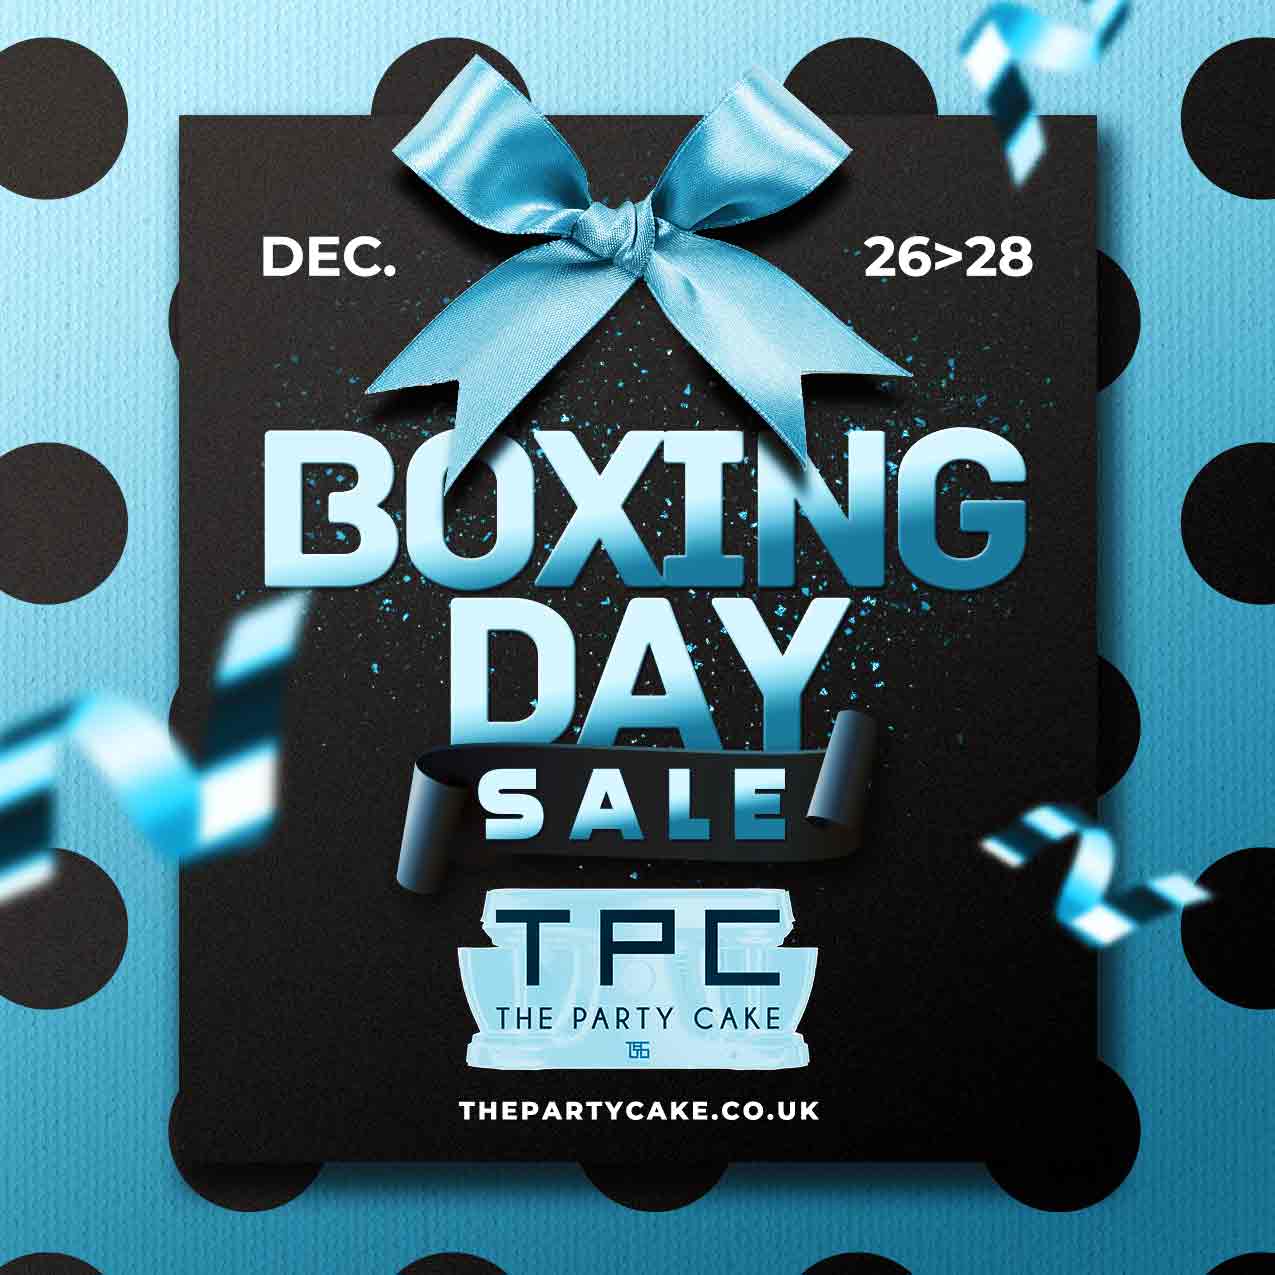 Featured image for “Boxing Day Sale”